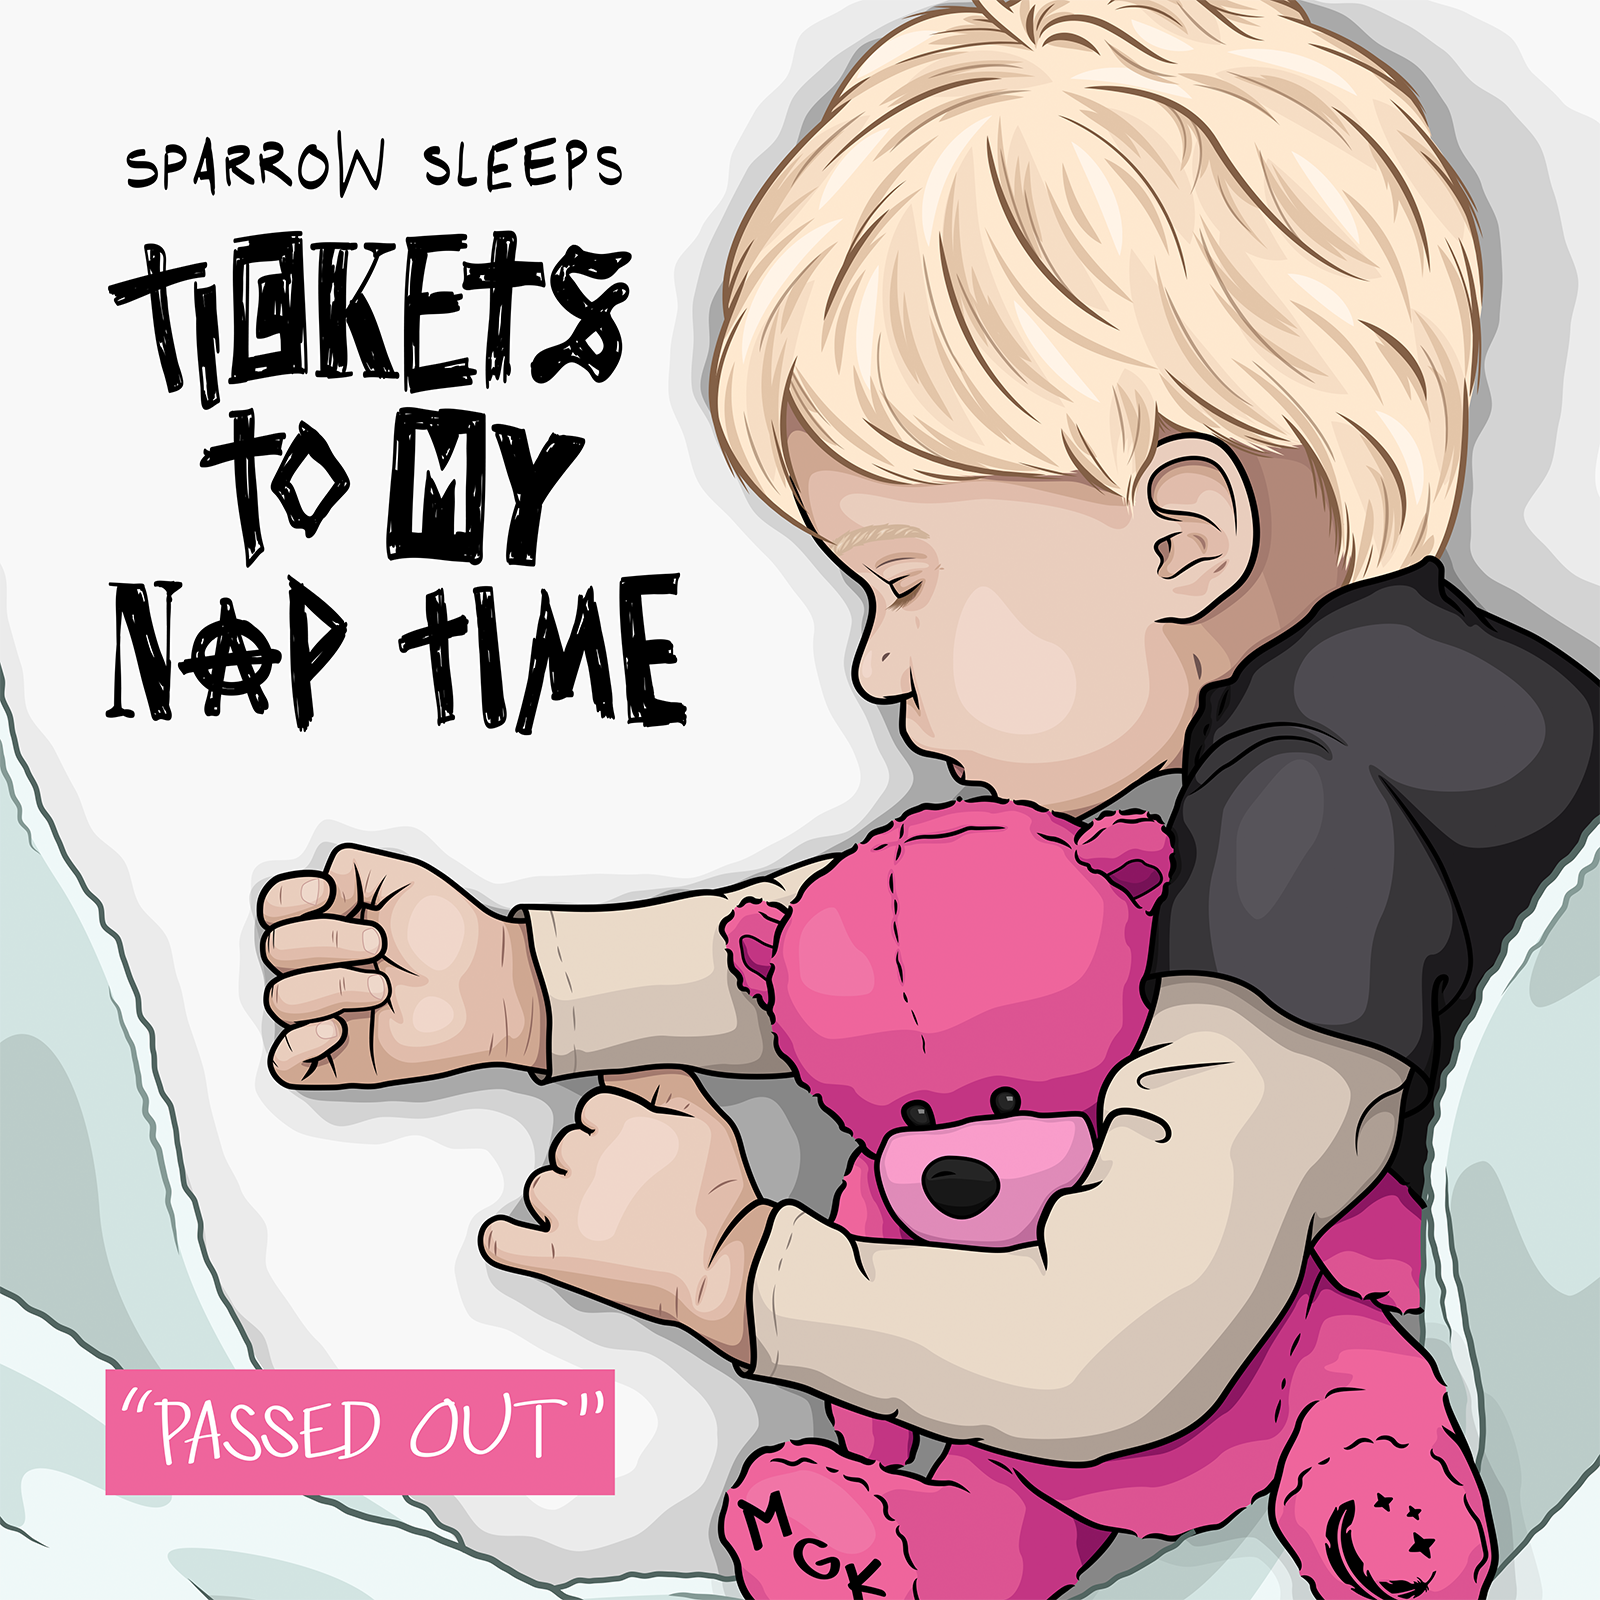 Tickets To My Naptime (Passed Out Deluxe)